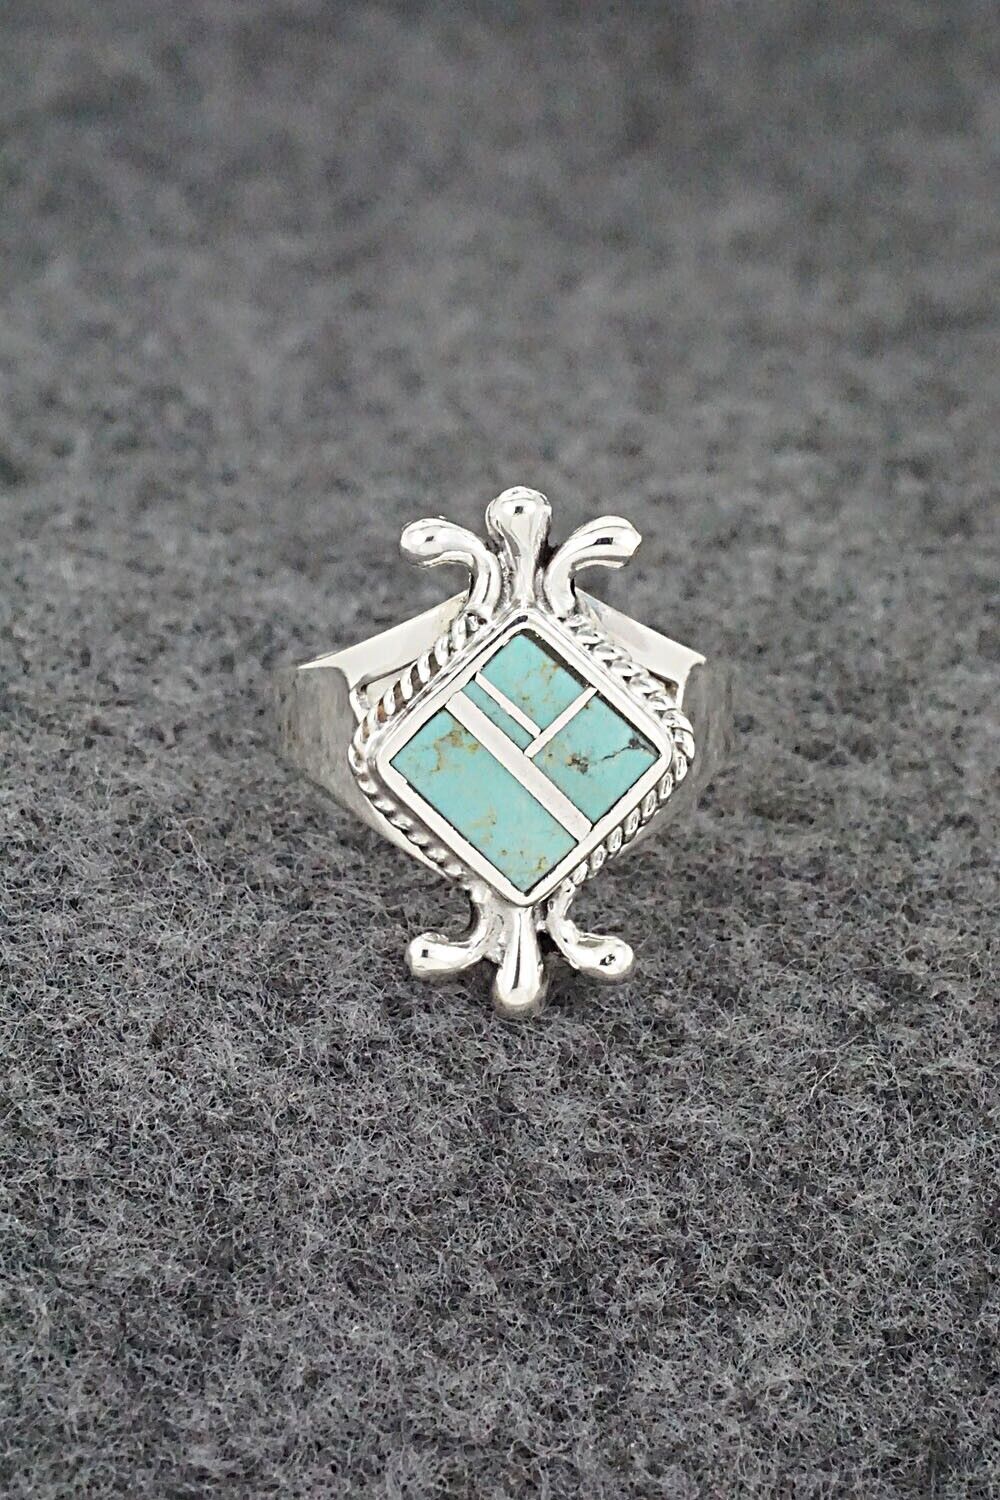 Turquoise & Sterling Silver Inlay Ring - James Manygoats - Size 7